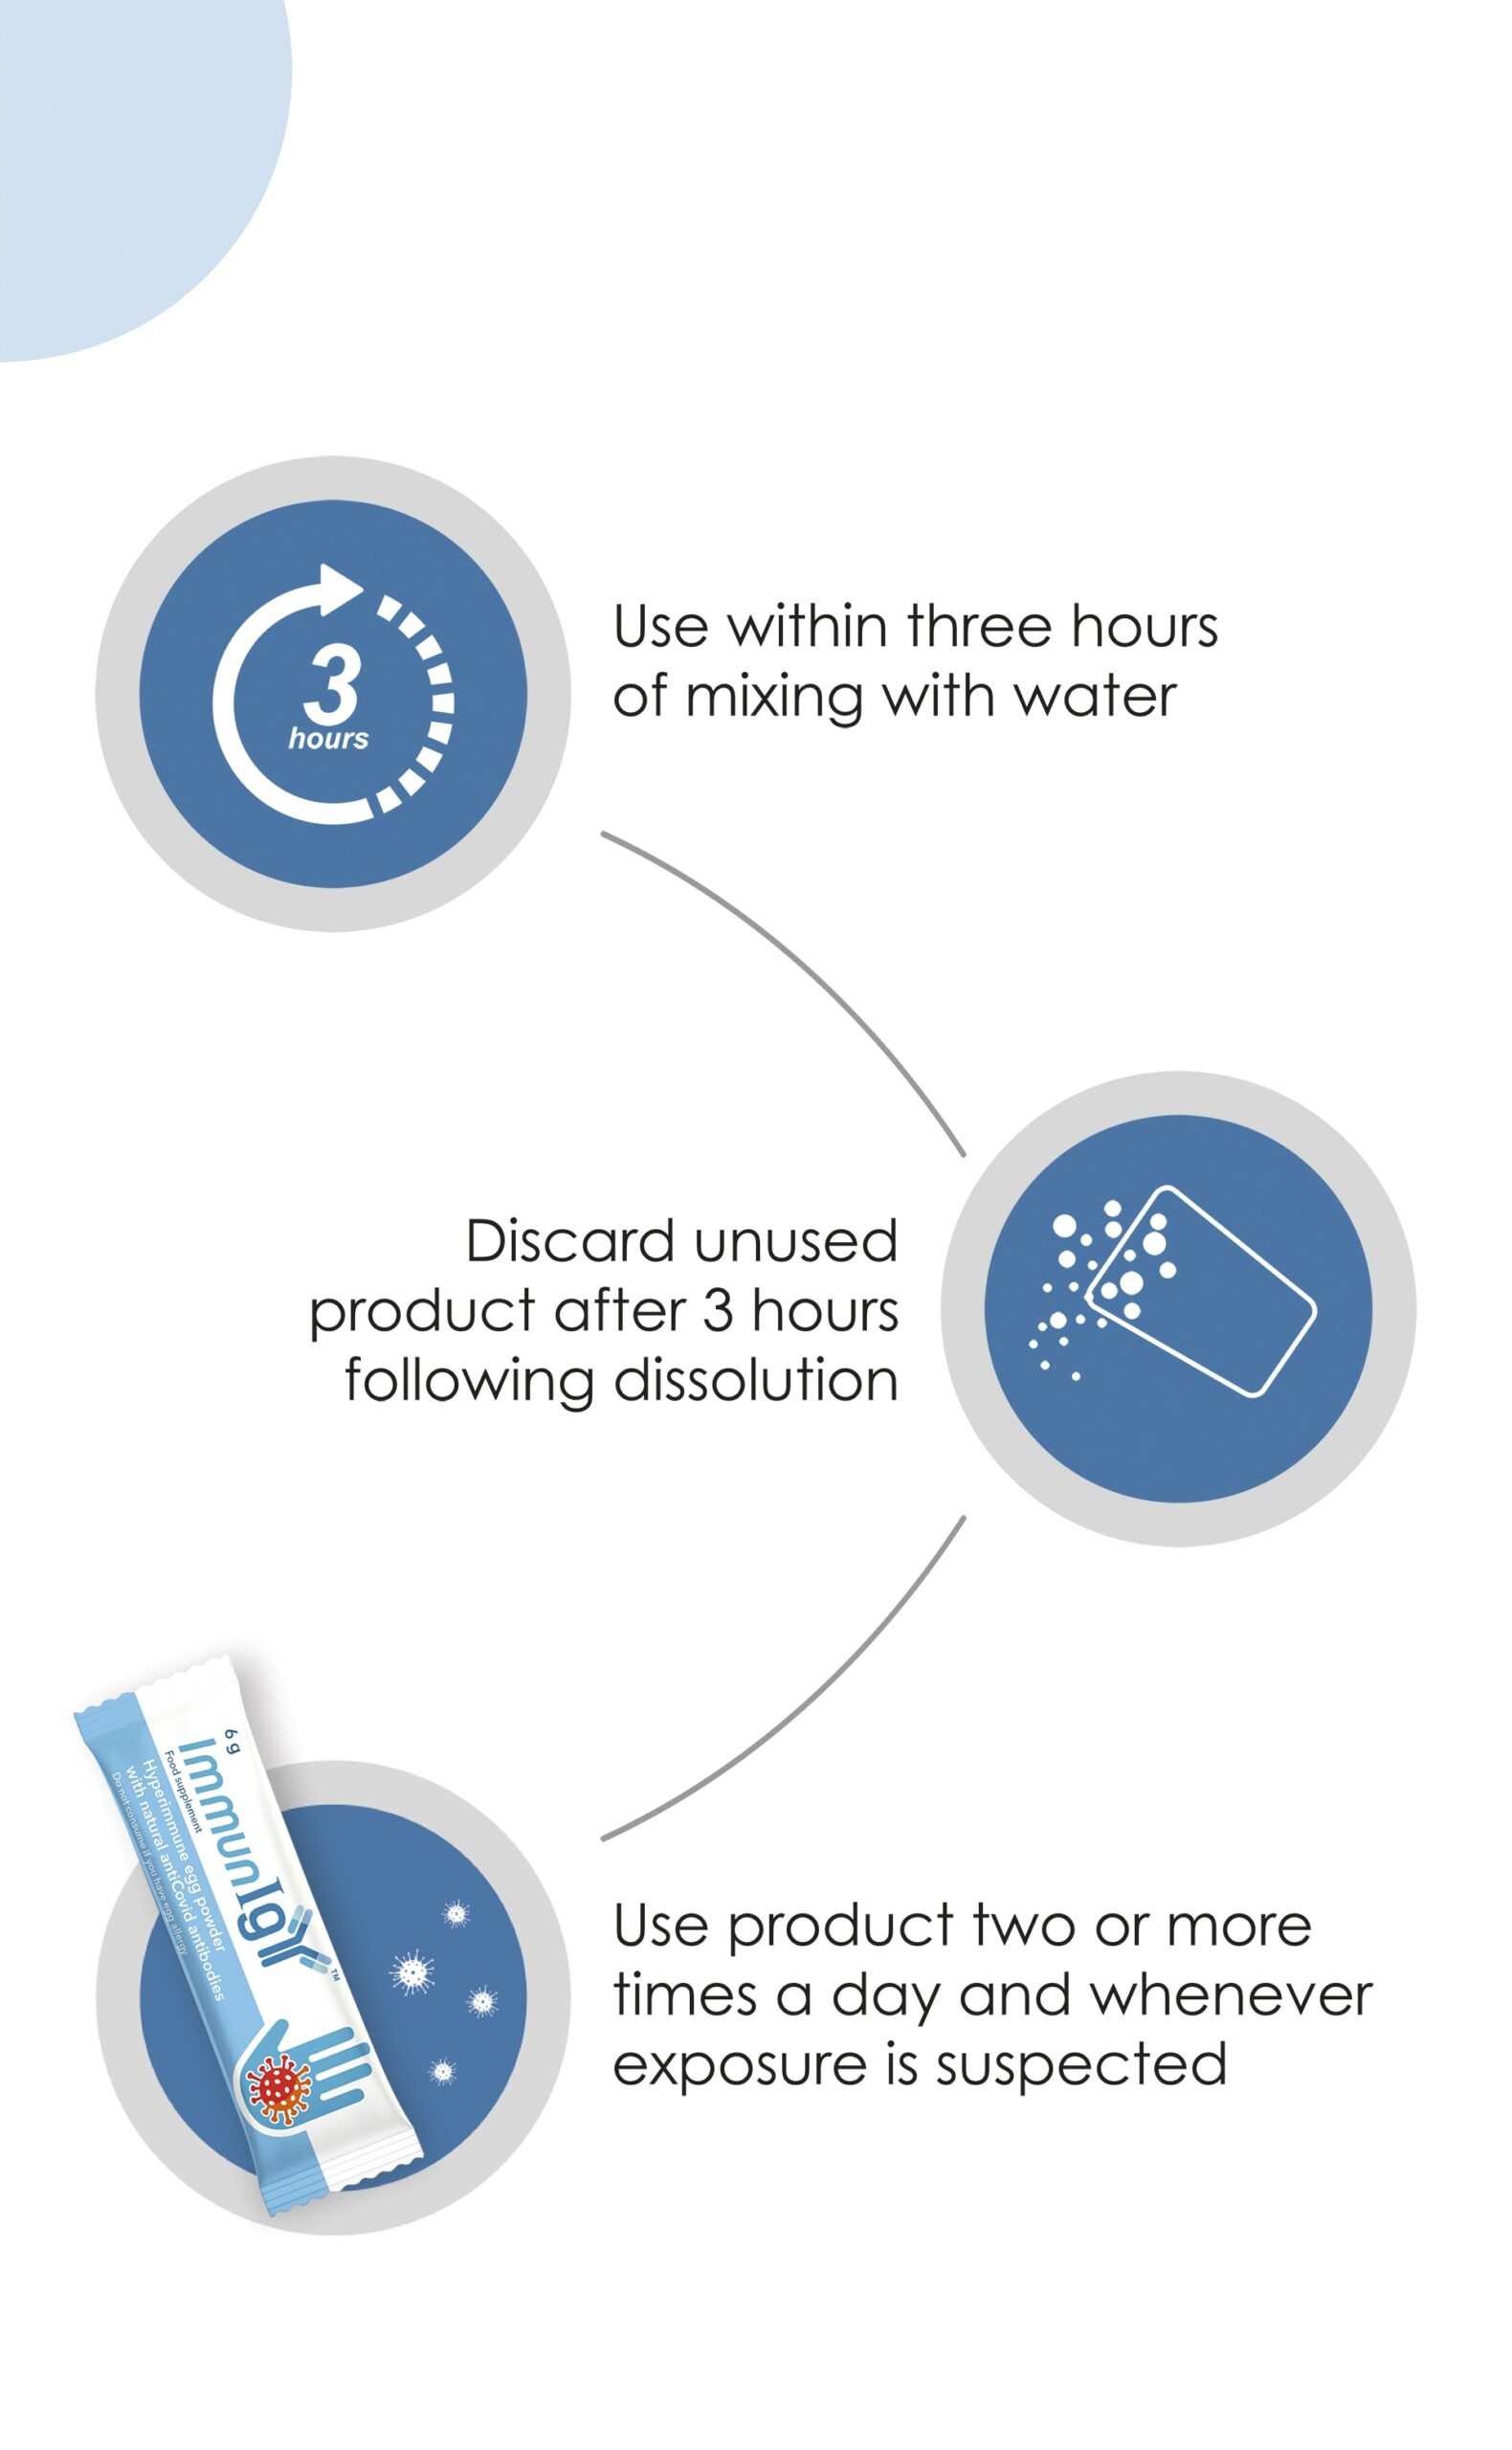 Use within three hours of mixing with water. Discard unused product after 3 hours following dissolution. Use product two or more times a day and whenever exposure is suspected.